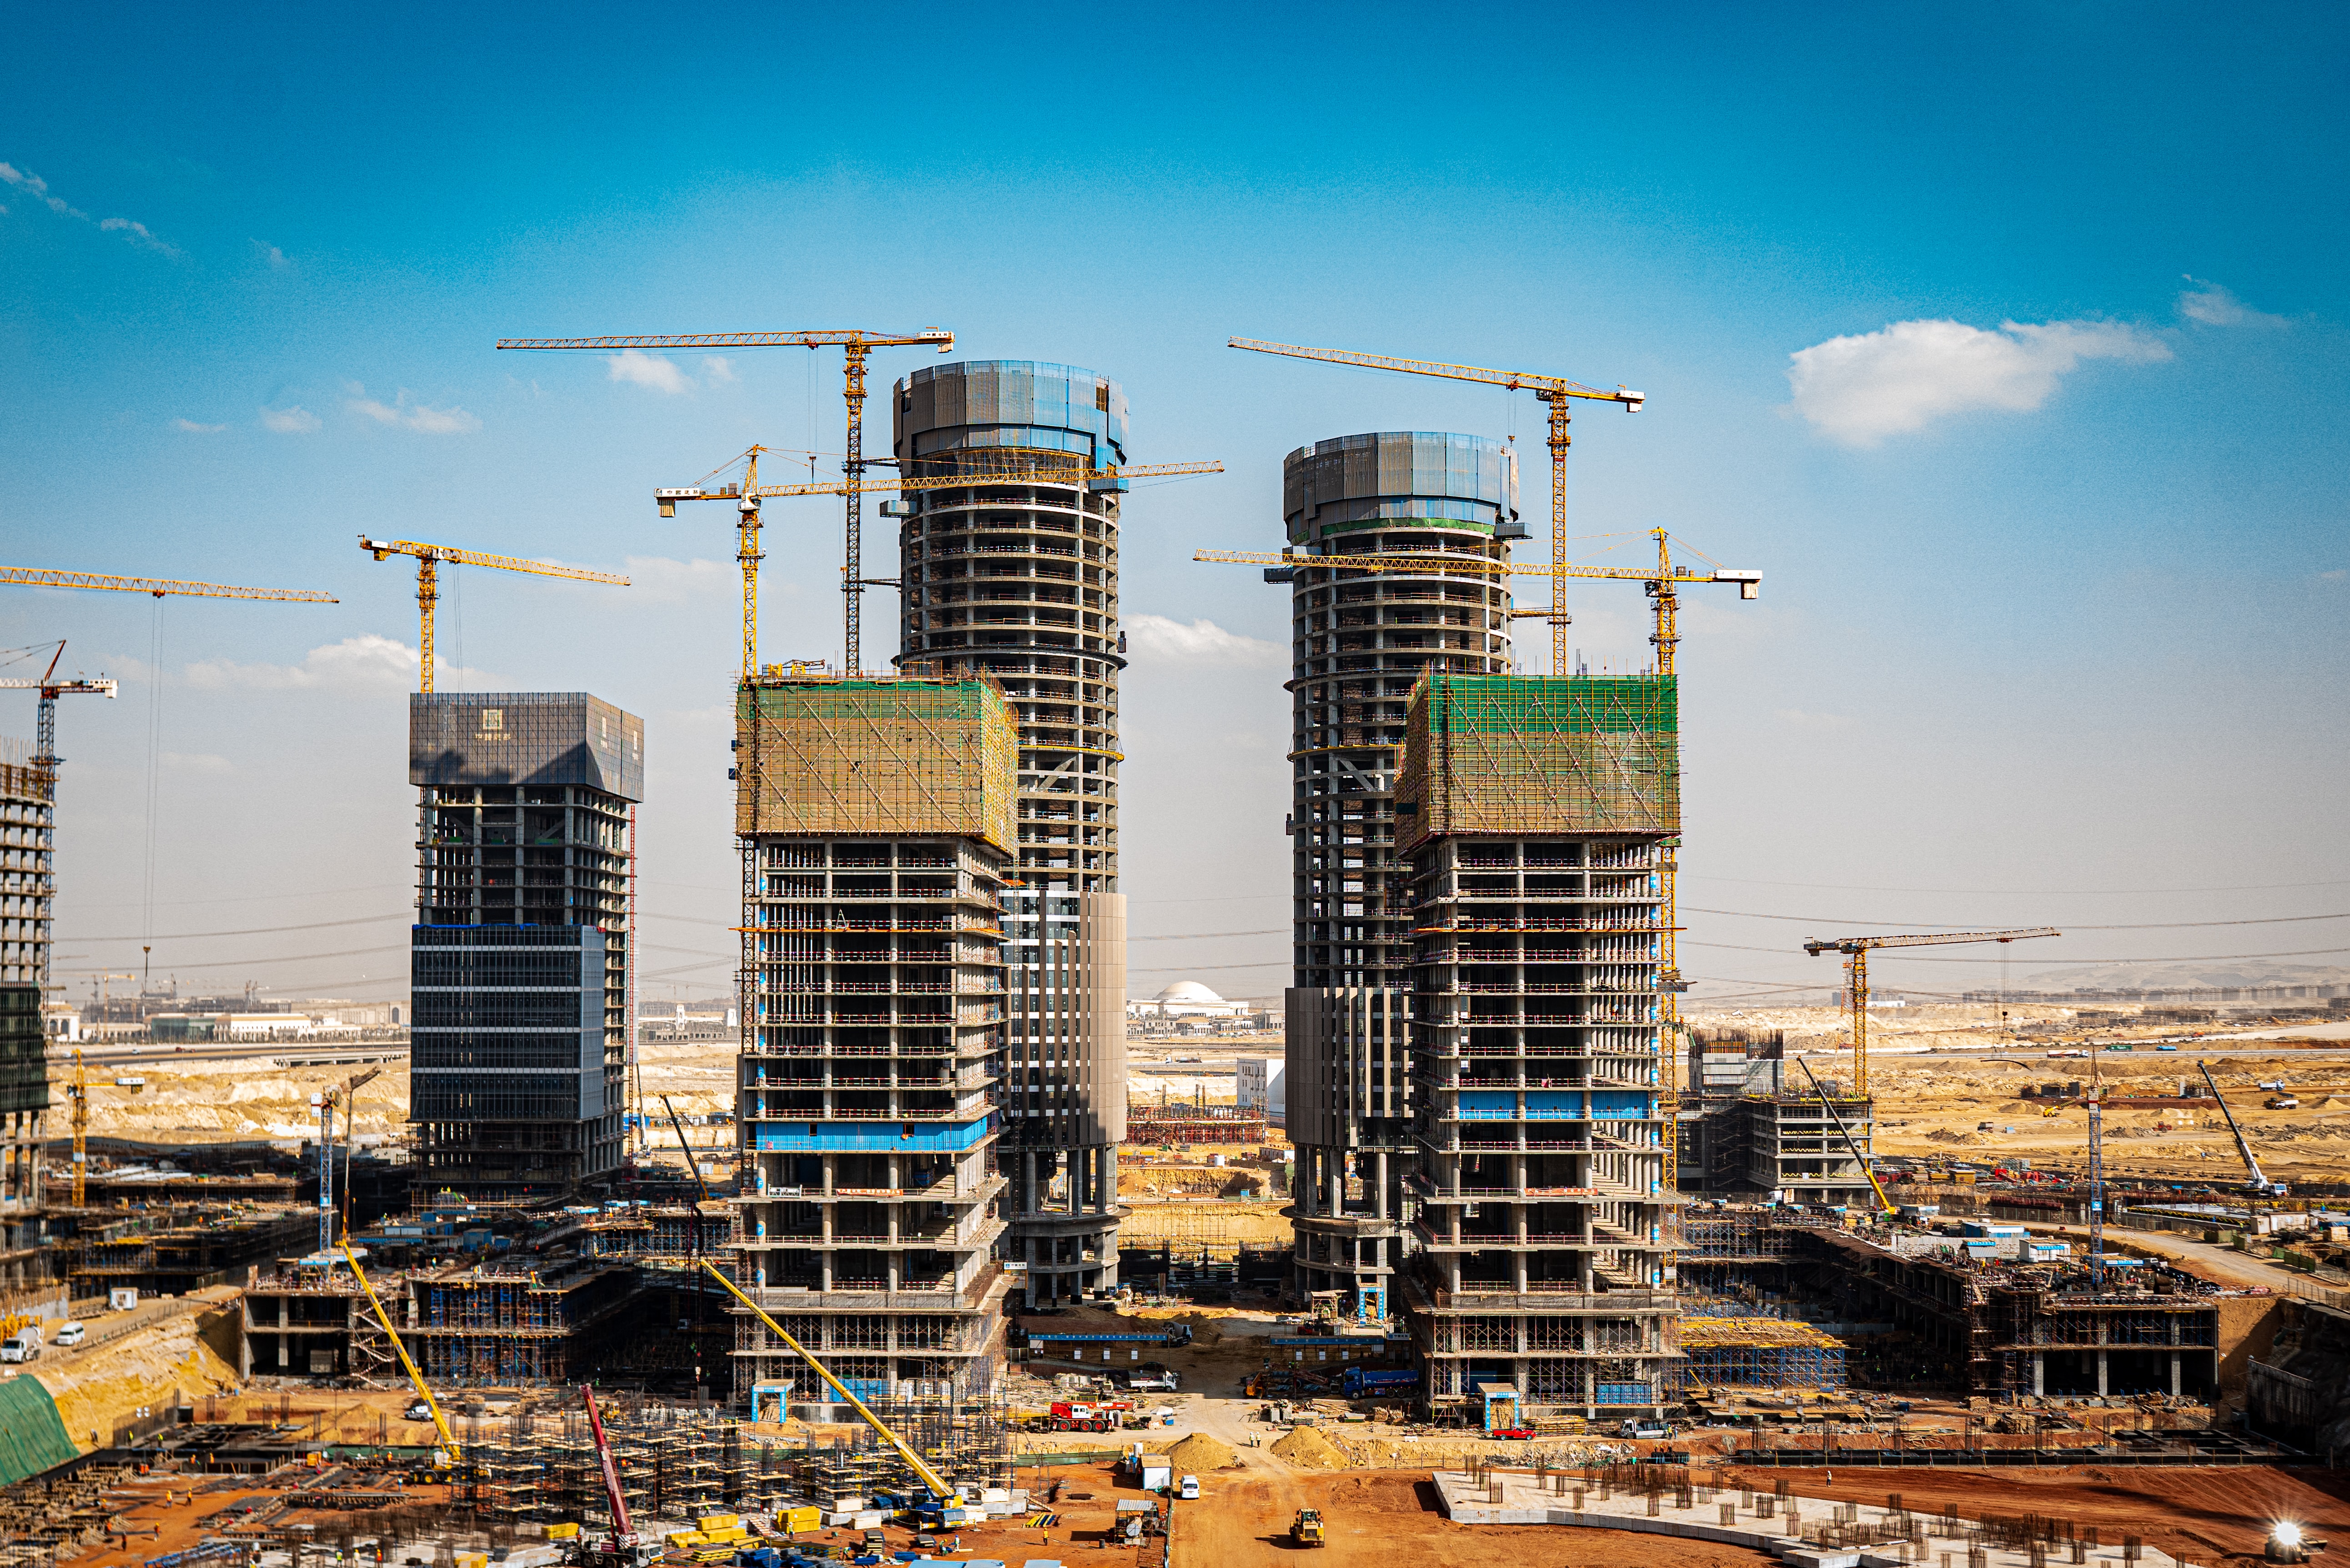 Top five multi-family housing construction projects that commenced in India in Q2 2022